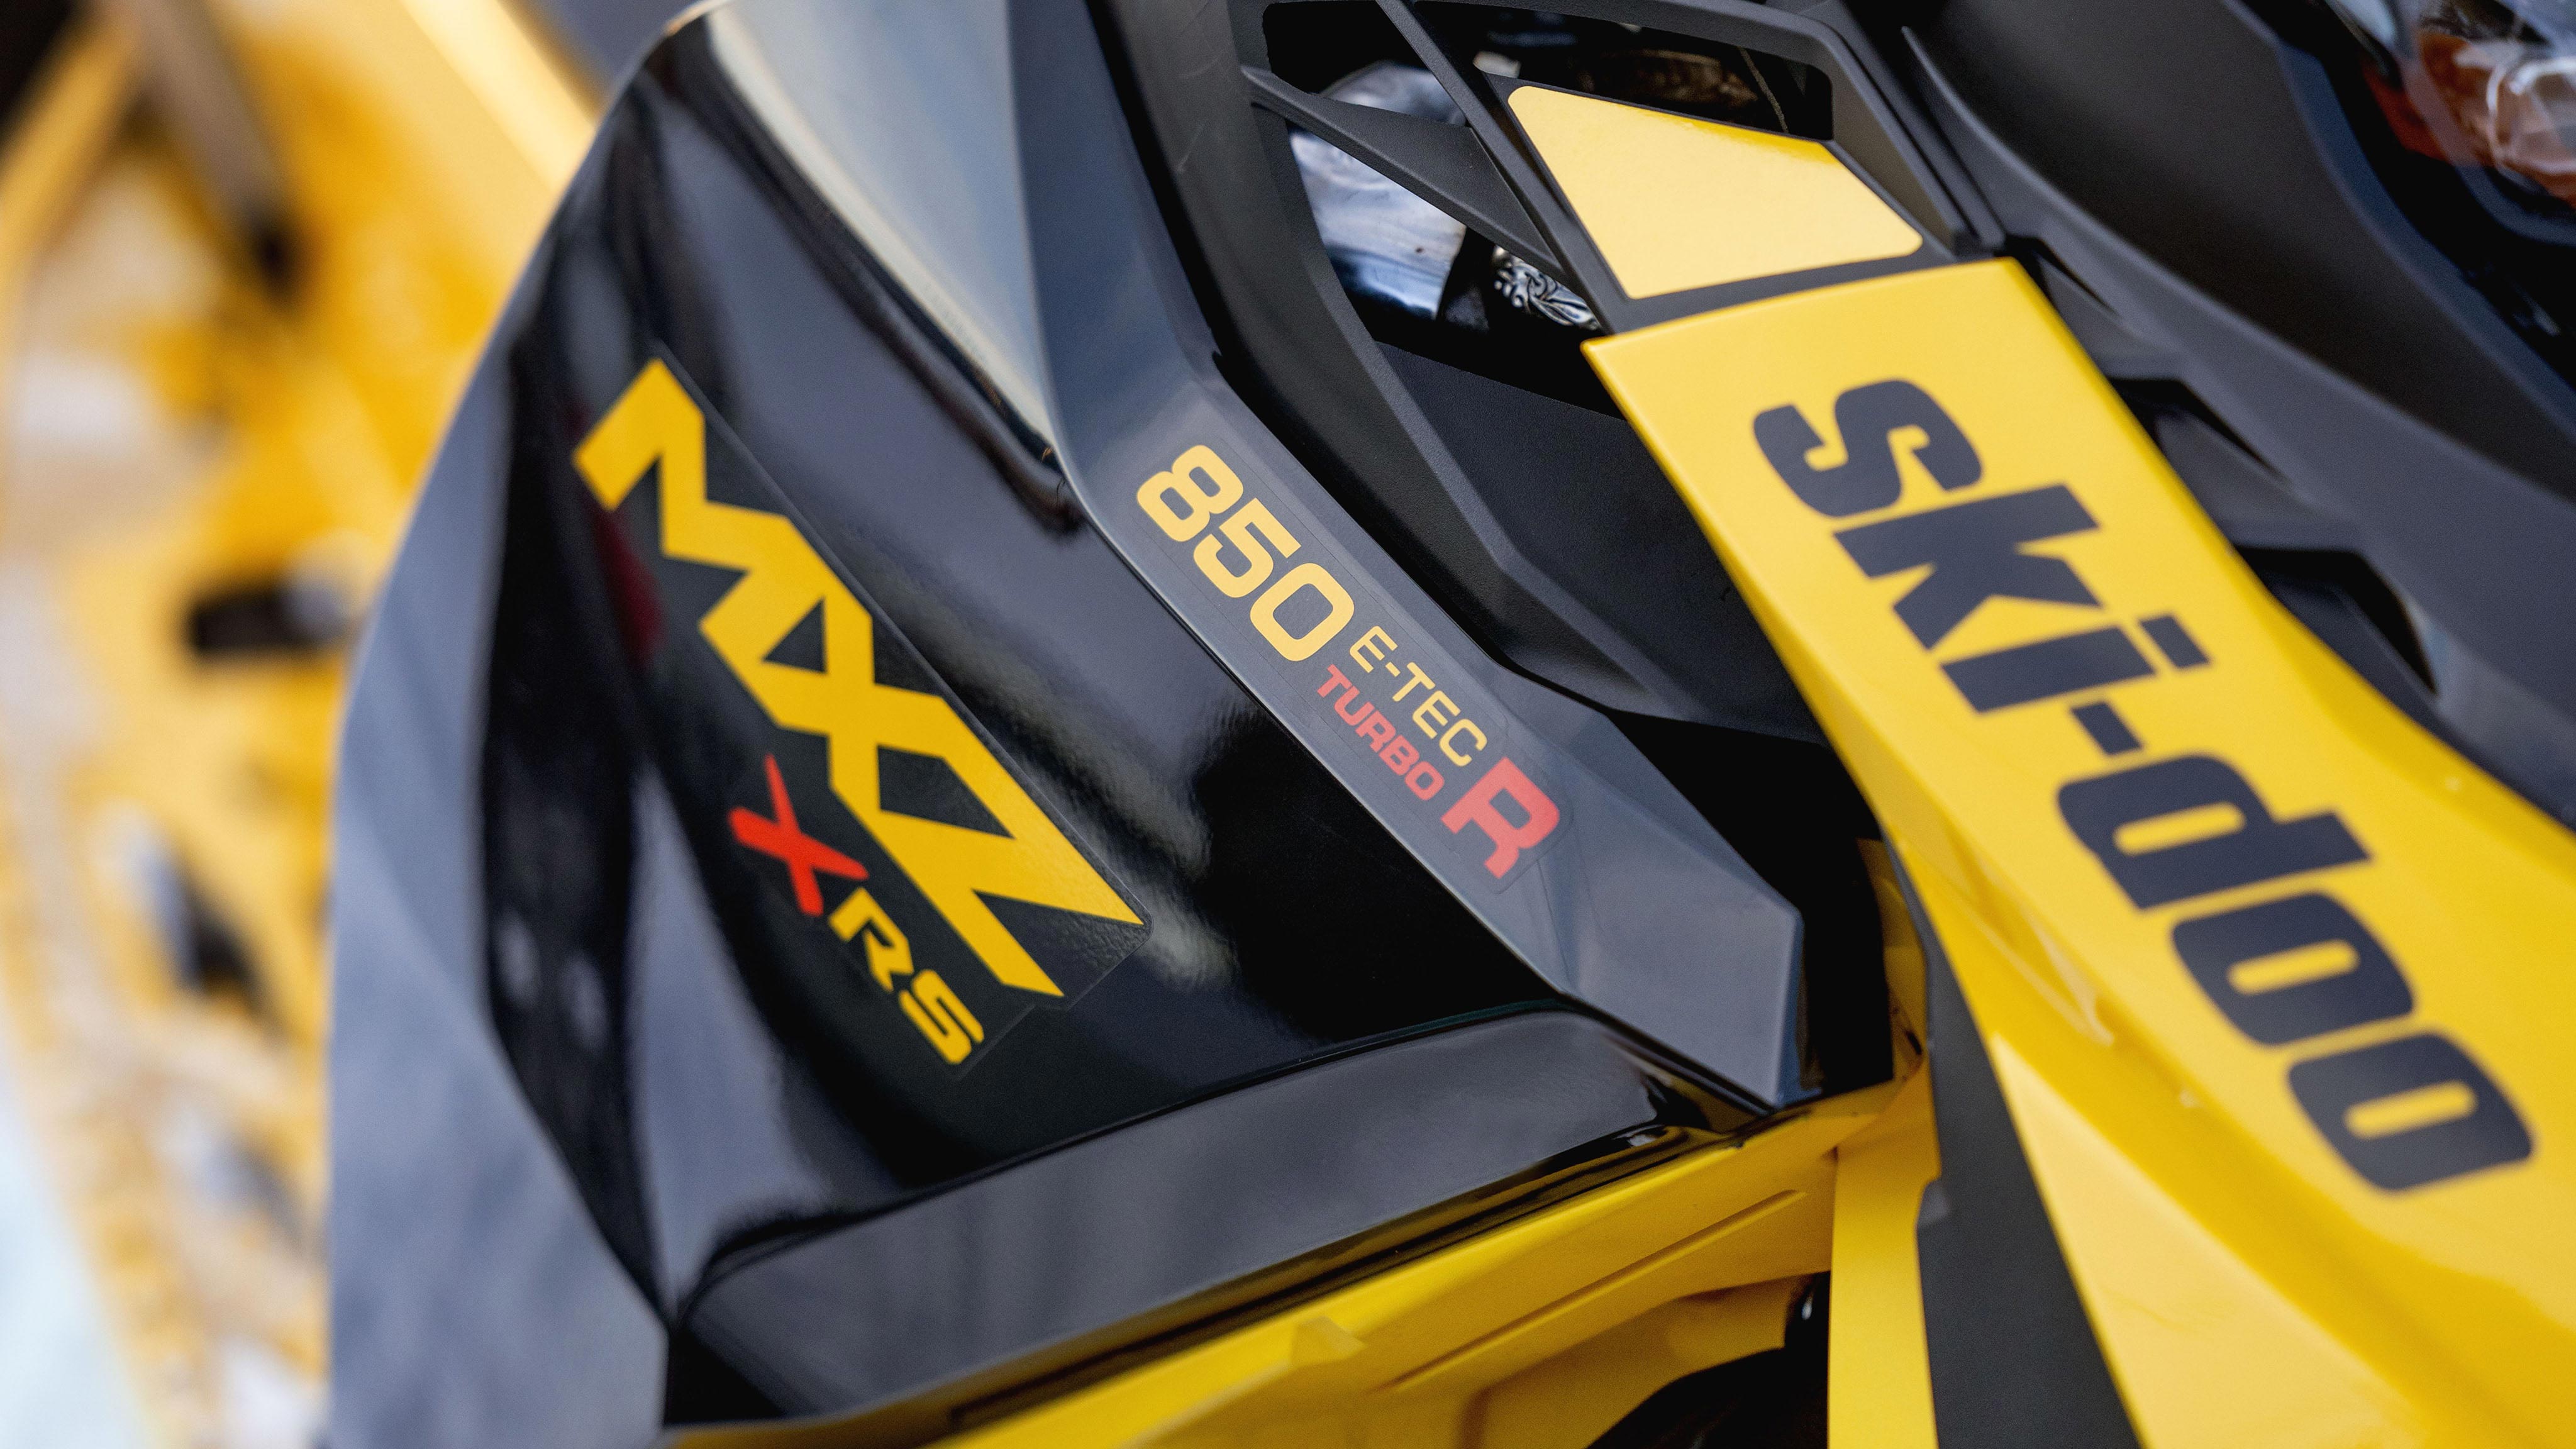 Close-Up of the MXZ X-RS with Competition Package 850 E-TEC Turbo R decals